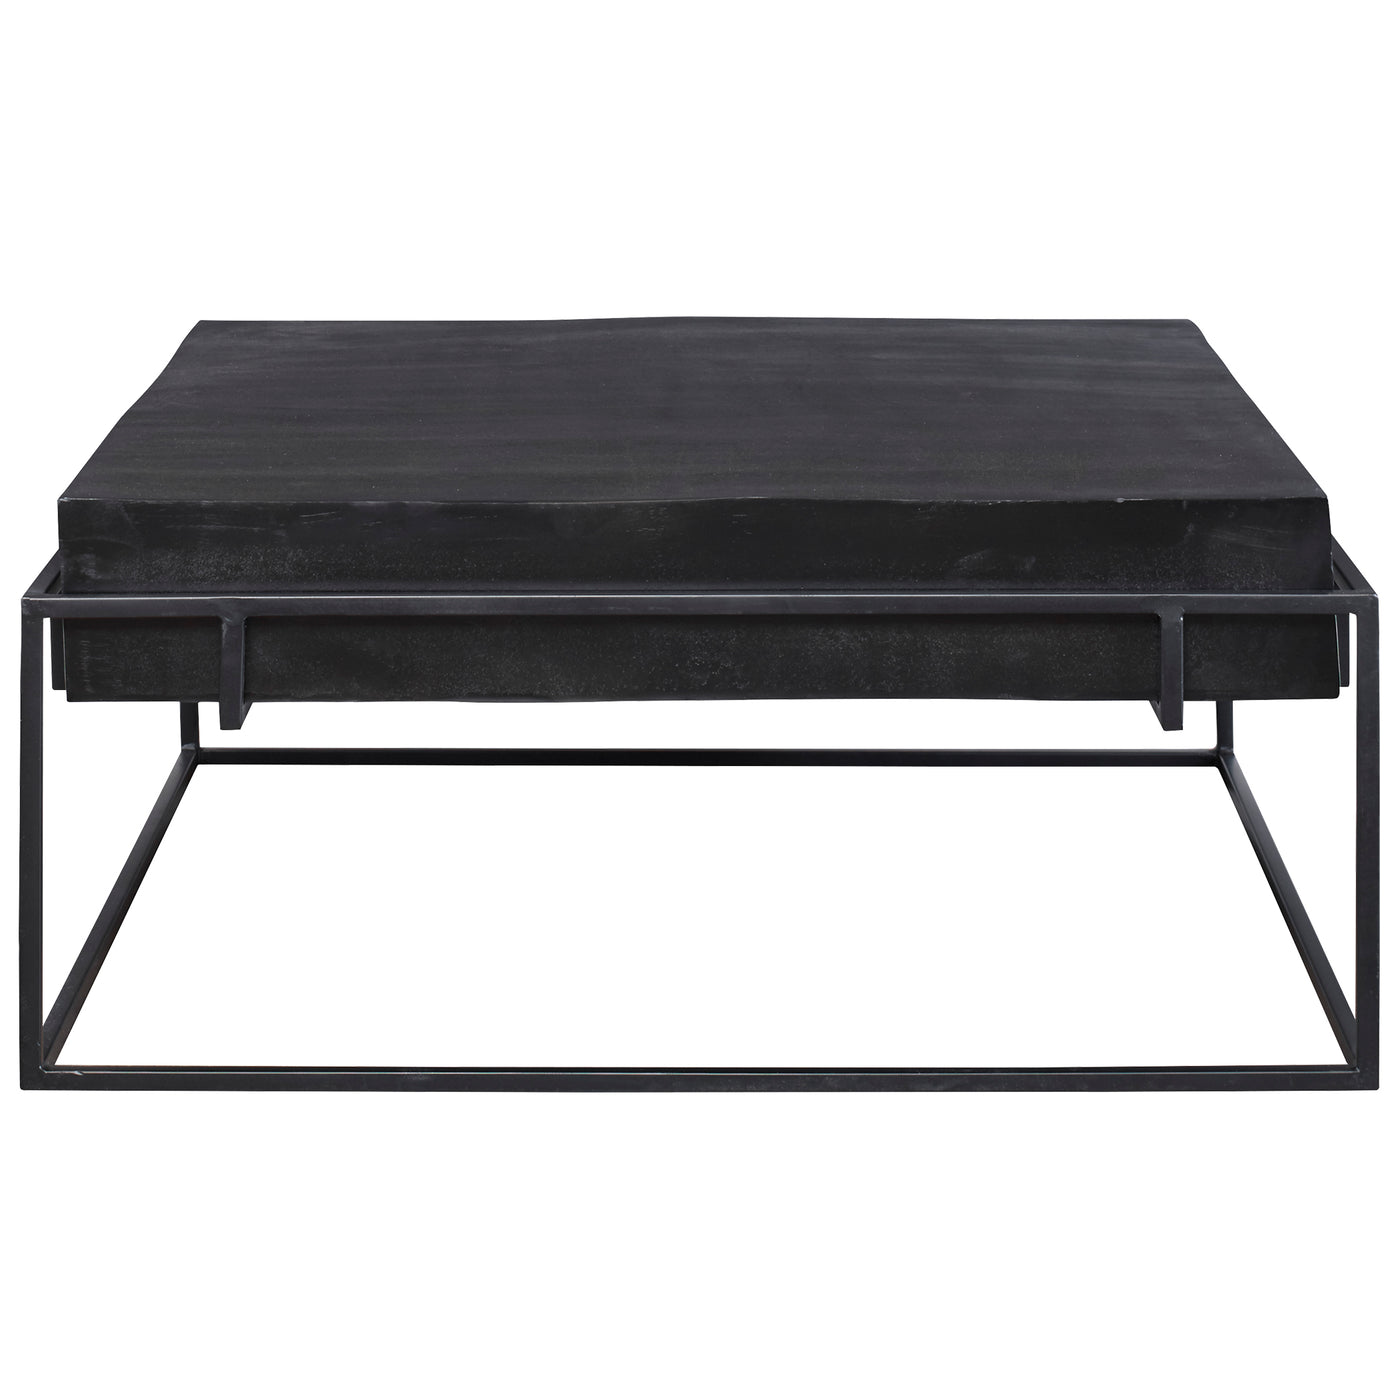 With Modern Minimalist Styling, This Coffee Table Features A Thick Cast Aluminum Top With Natural Texturing Finished In A ...